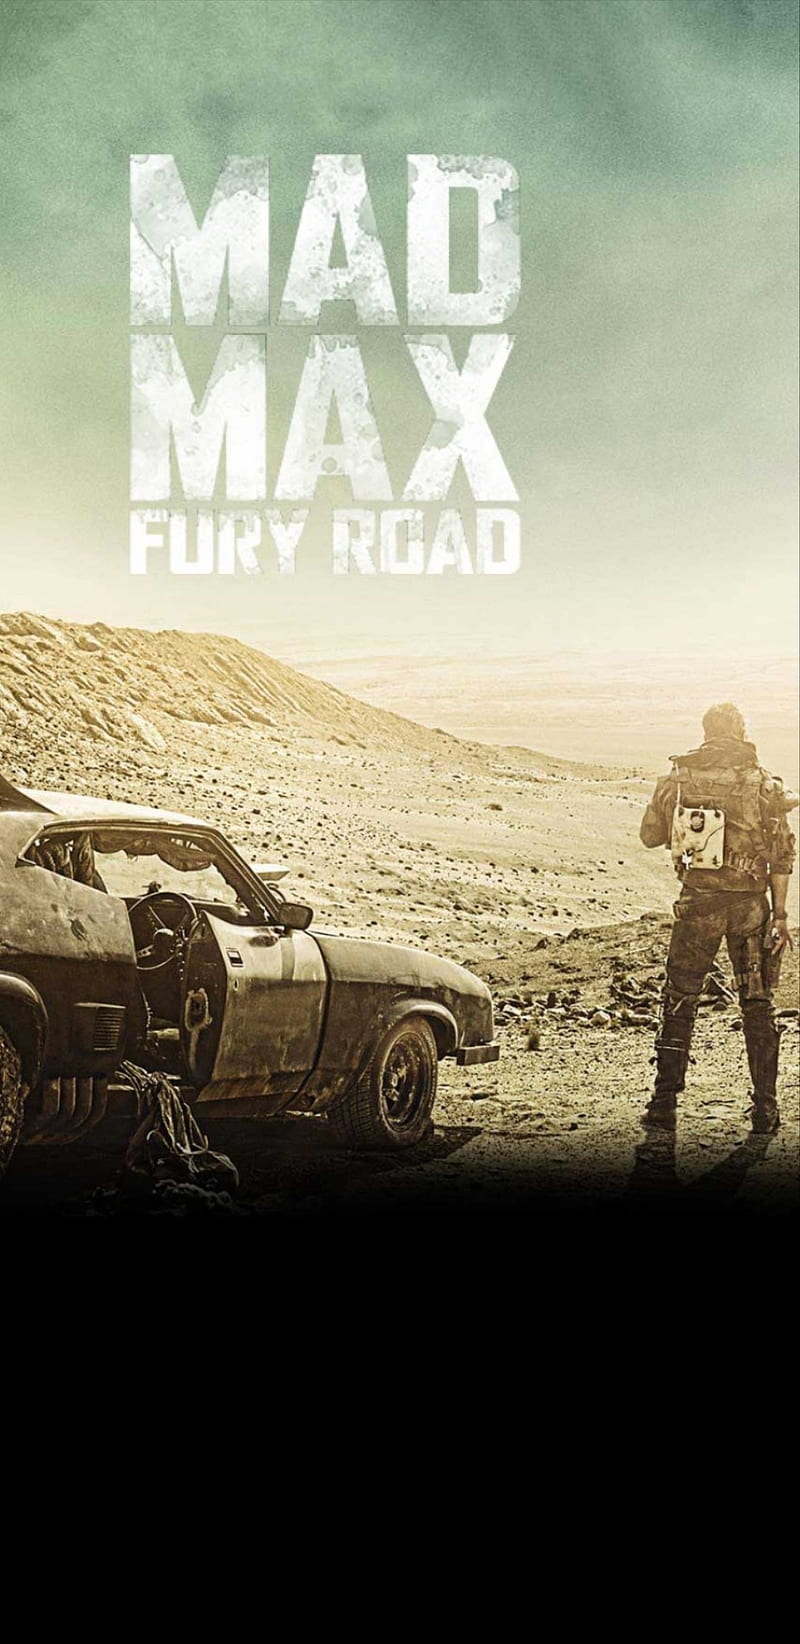 100+] Mad Max Fury Road Wallpapers | Wallpapers.com